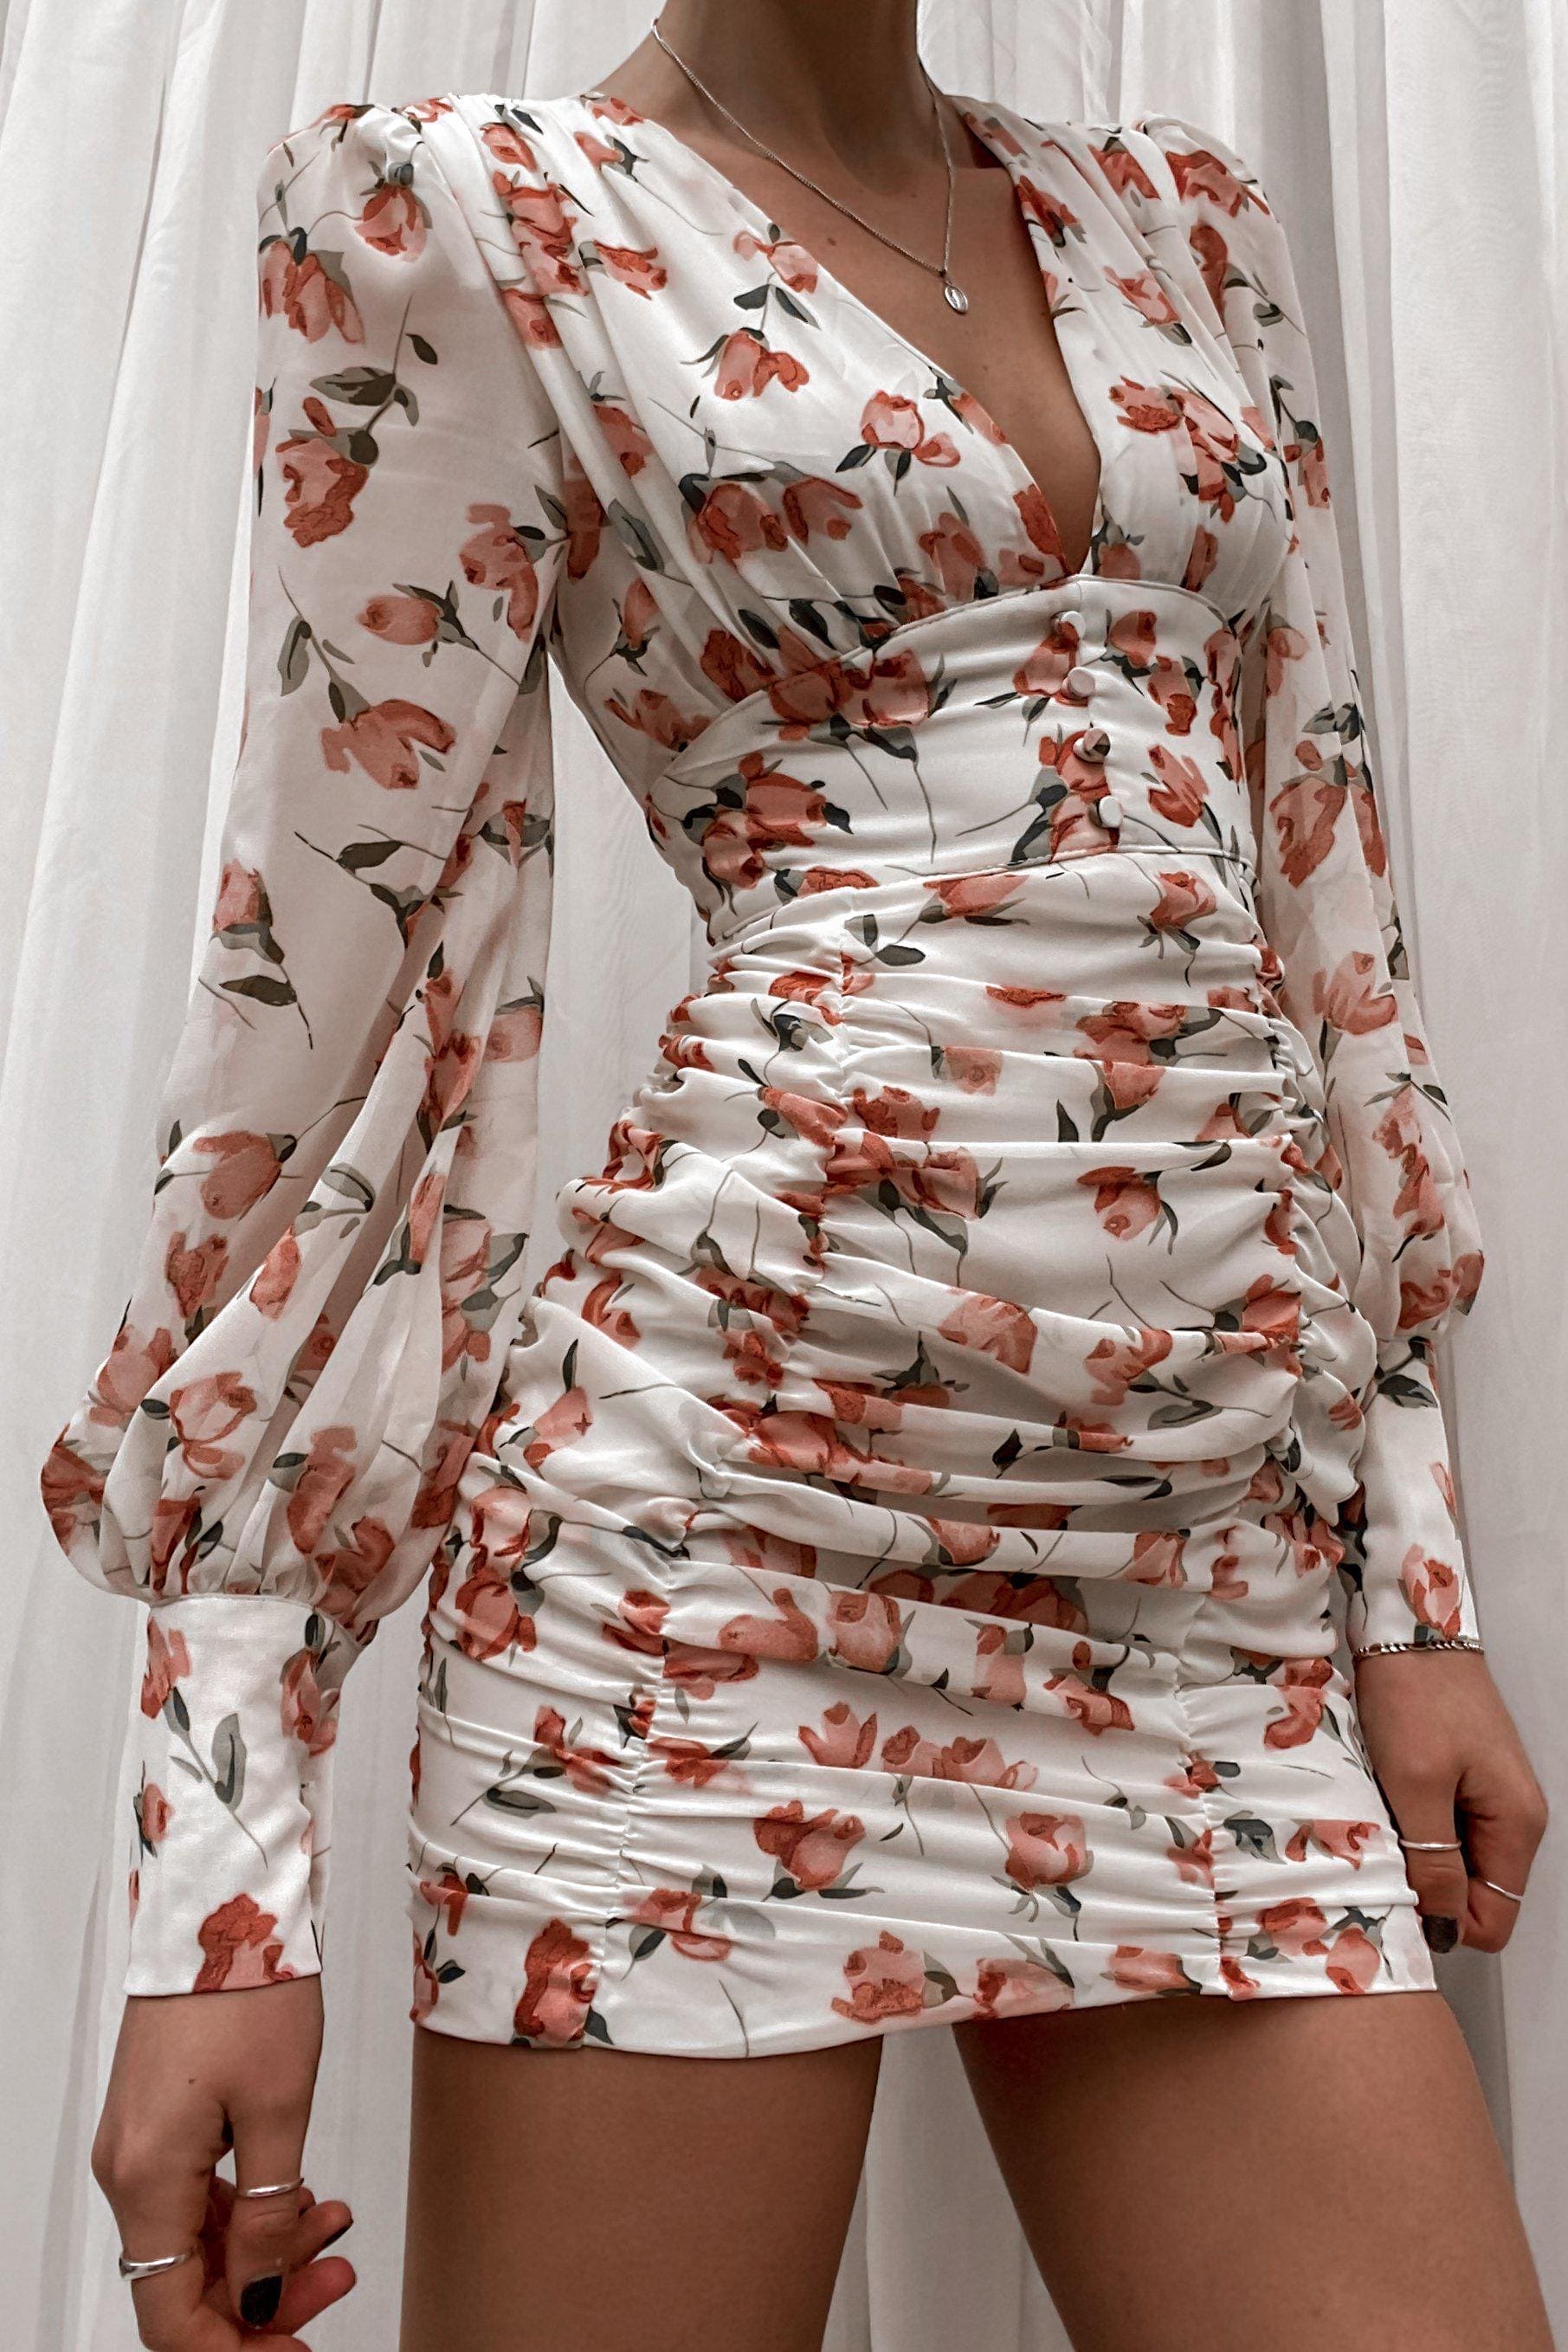 Untamed Dress, BALLOON SLEEVE, DRESS, DRESSES, FLORAL, GATHERED, LONG SLEEVE, PINK, POLYESTER, PRINT, Sale, WHITE, Untamed Dress only $131.00 @ MISHKAH ONLINE FASHION BOUTIQUE, Shop The Latest Women's Dresses - Our New Untamed Dress is only $131.00, @ MISHKAH ONLINE FASHION BOUTIQUE-MISHKAH